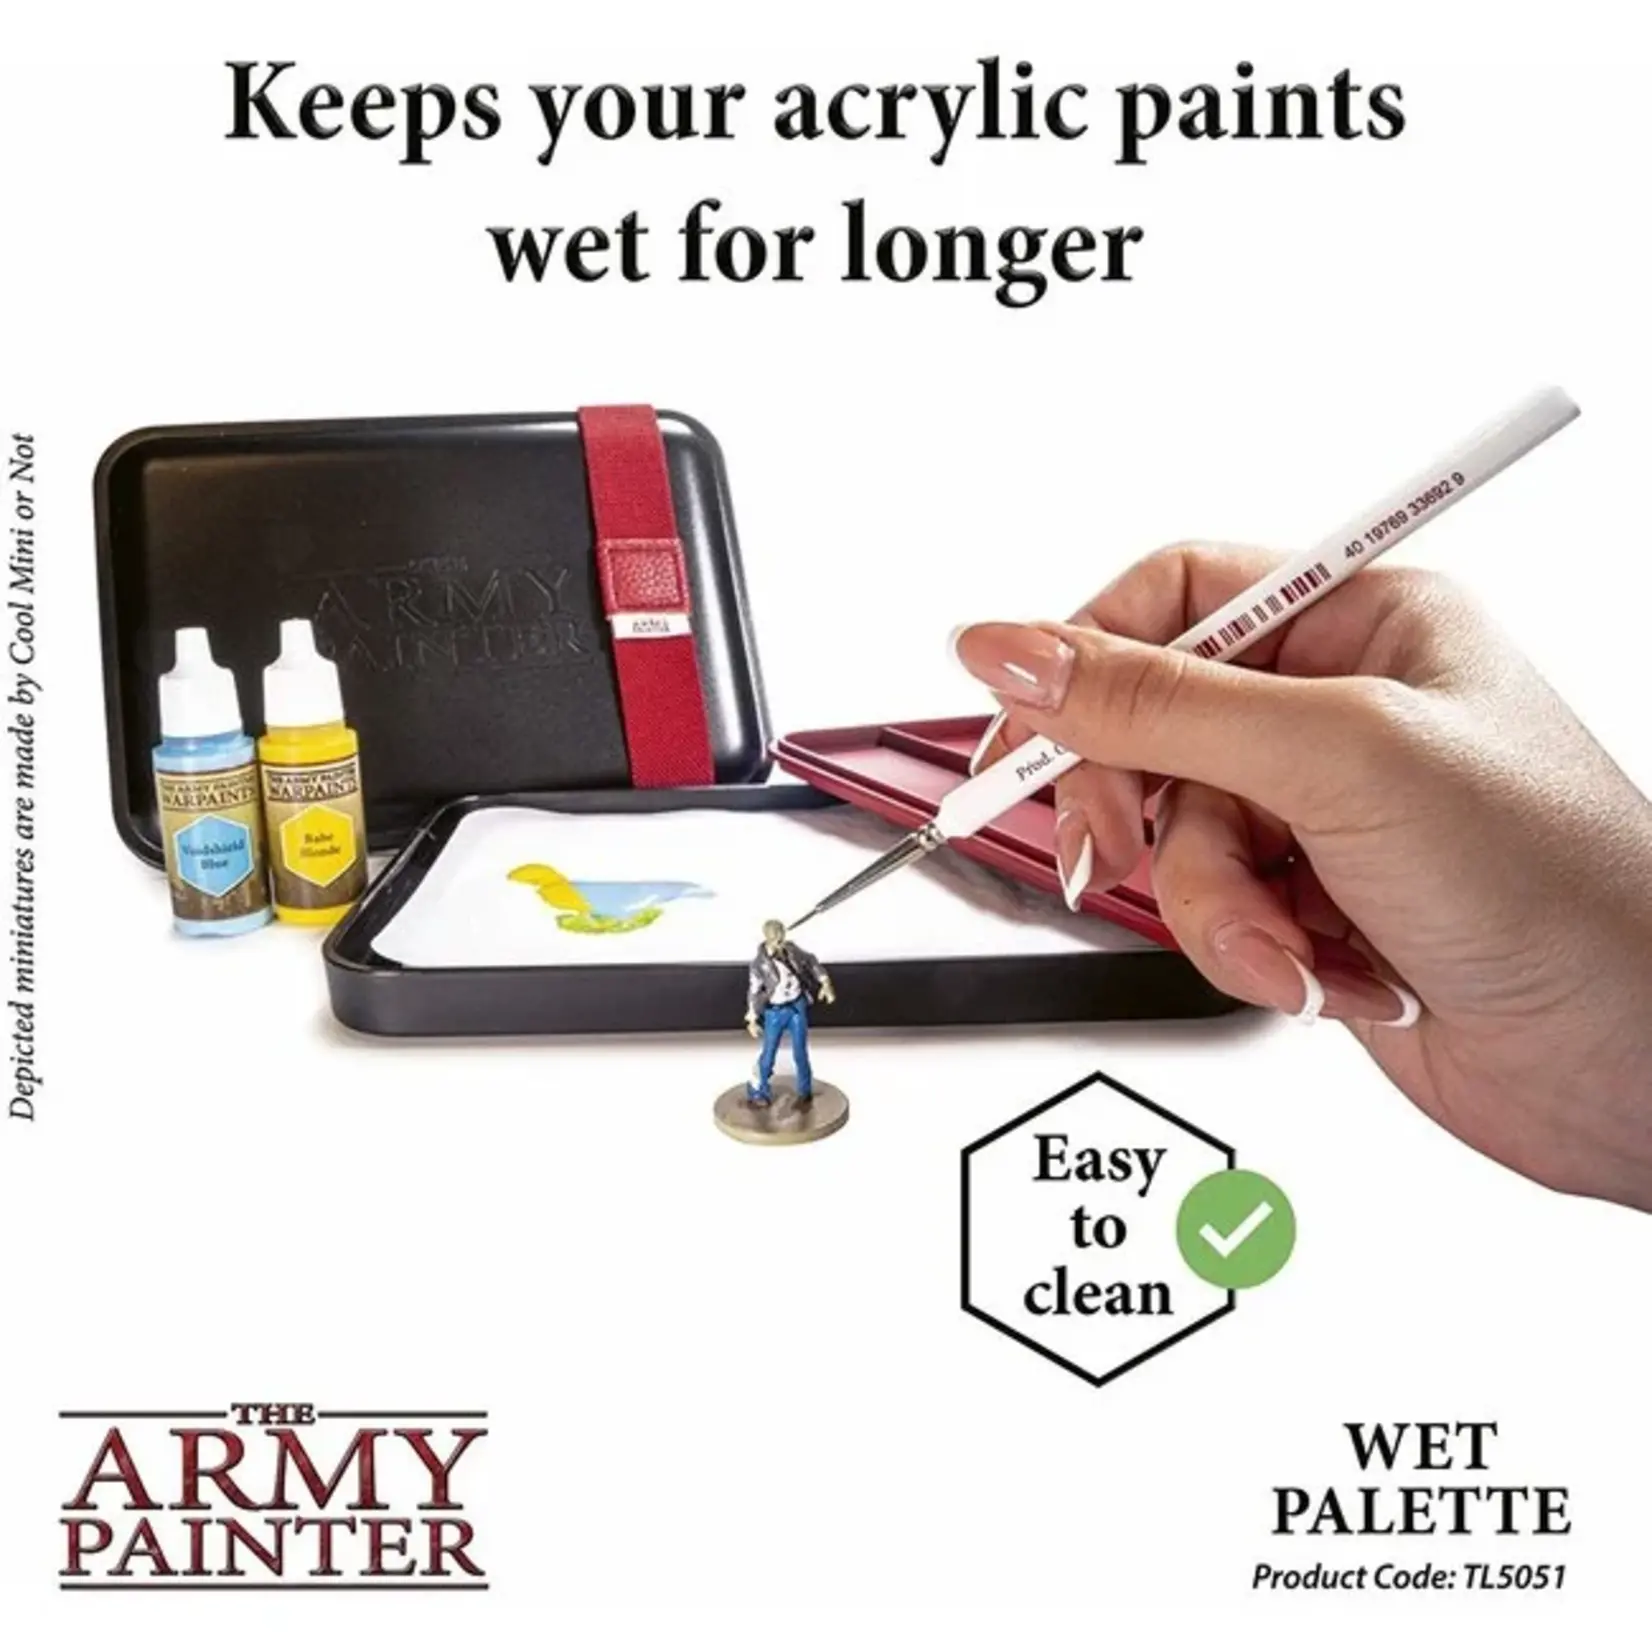 the army painter The Army Painter Wet Palette